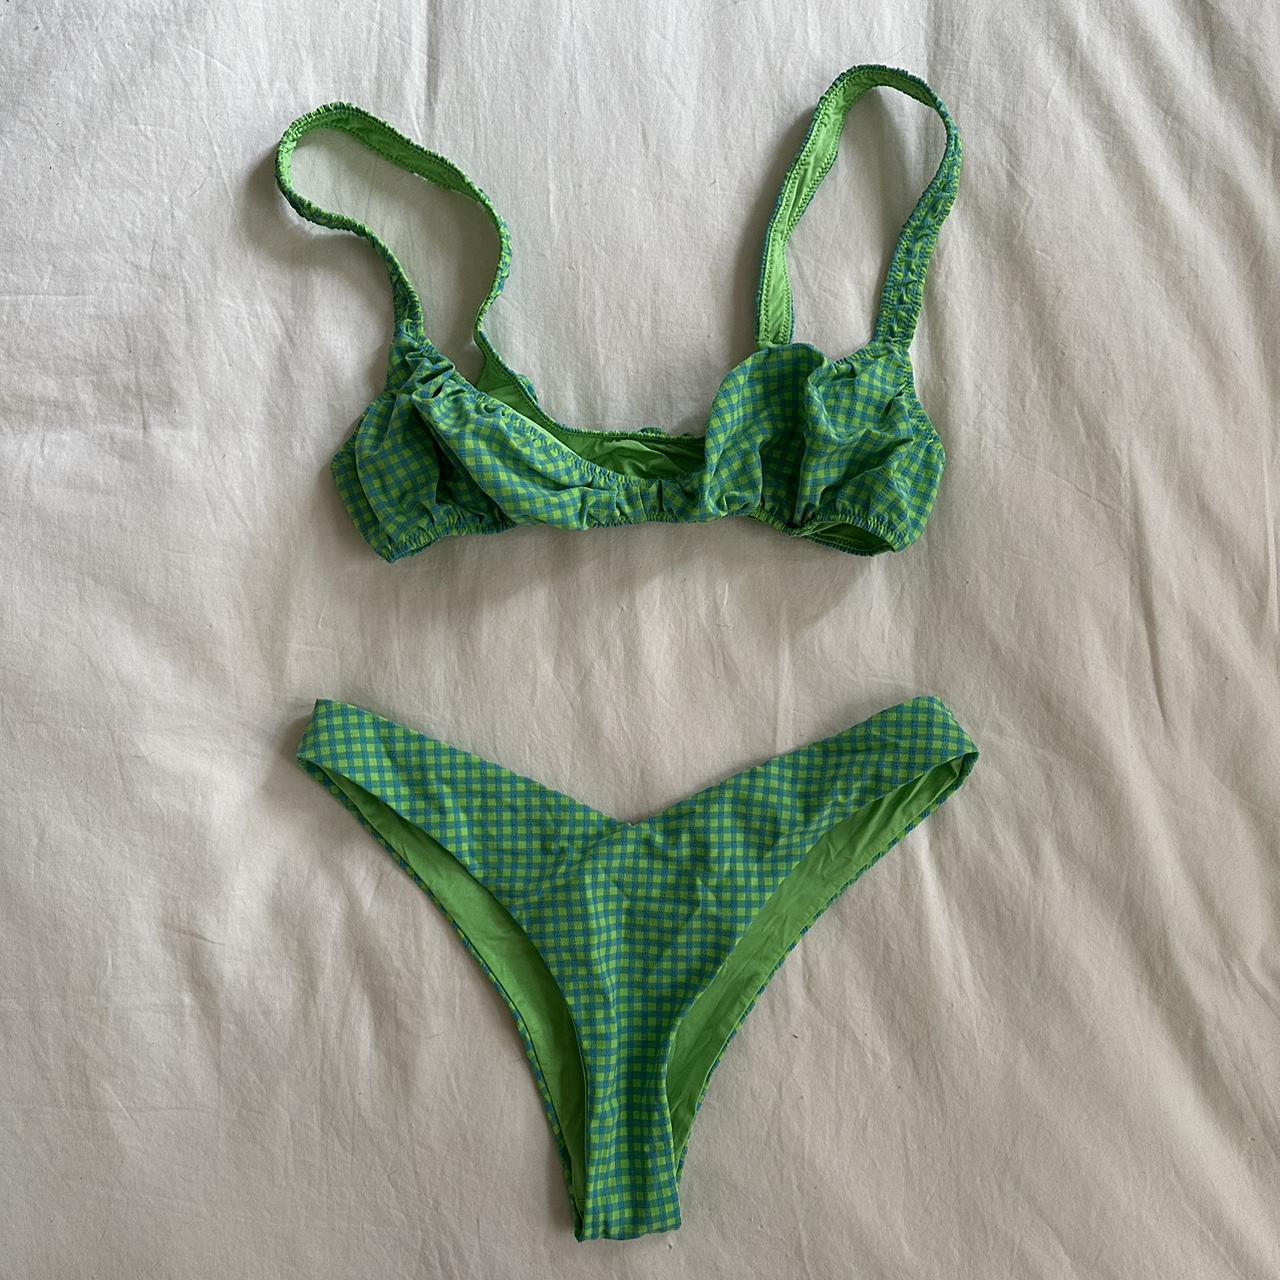 We Wore What Men's Green and Blue Bikinis-and-tankini-sets